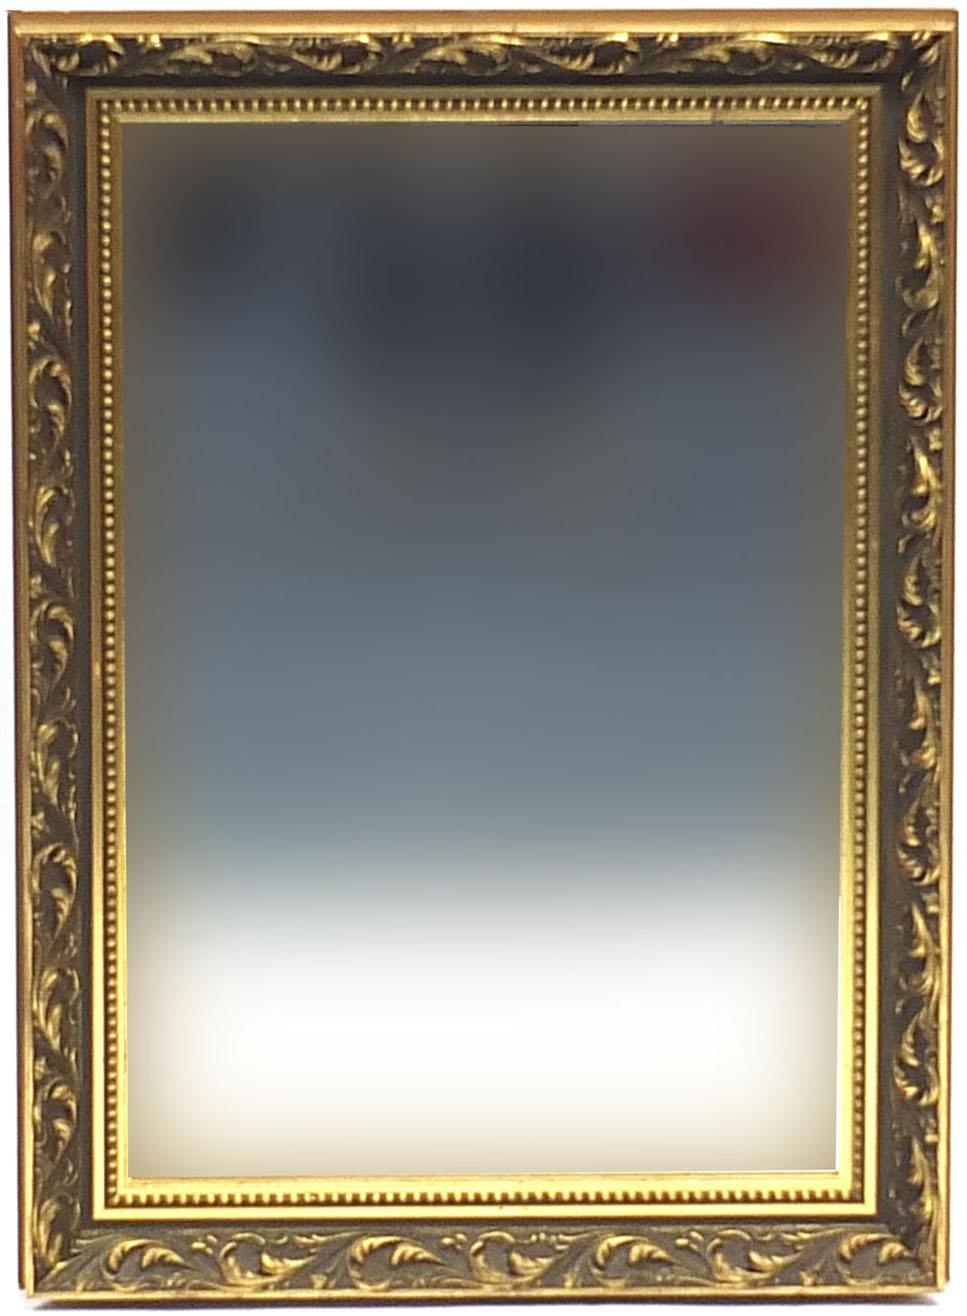 Ornate gilt framed wall hanging mirror with bevelled glass, 90cm x 65cm